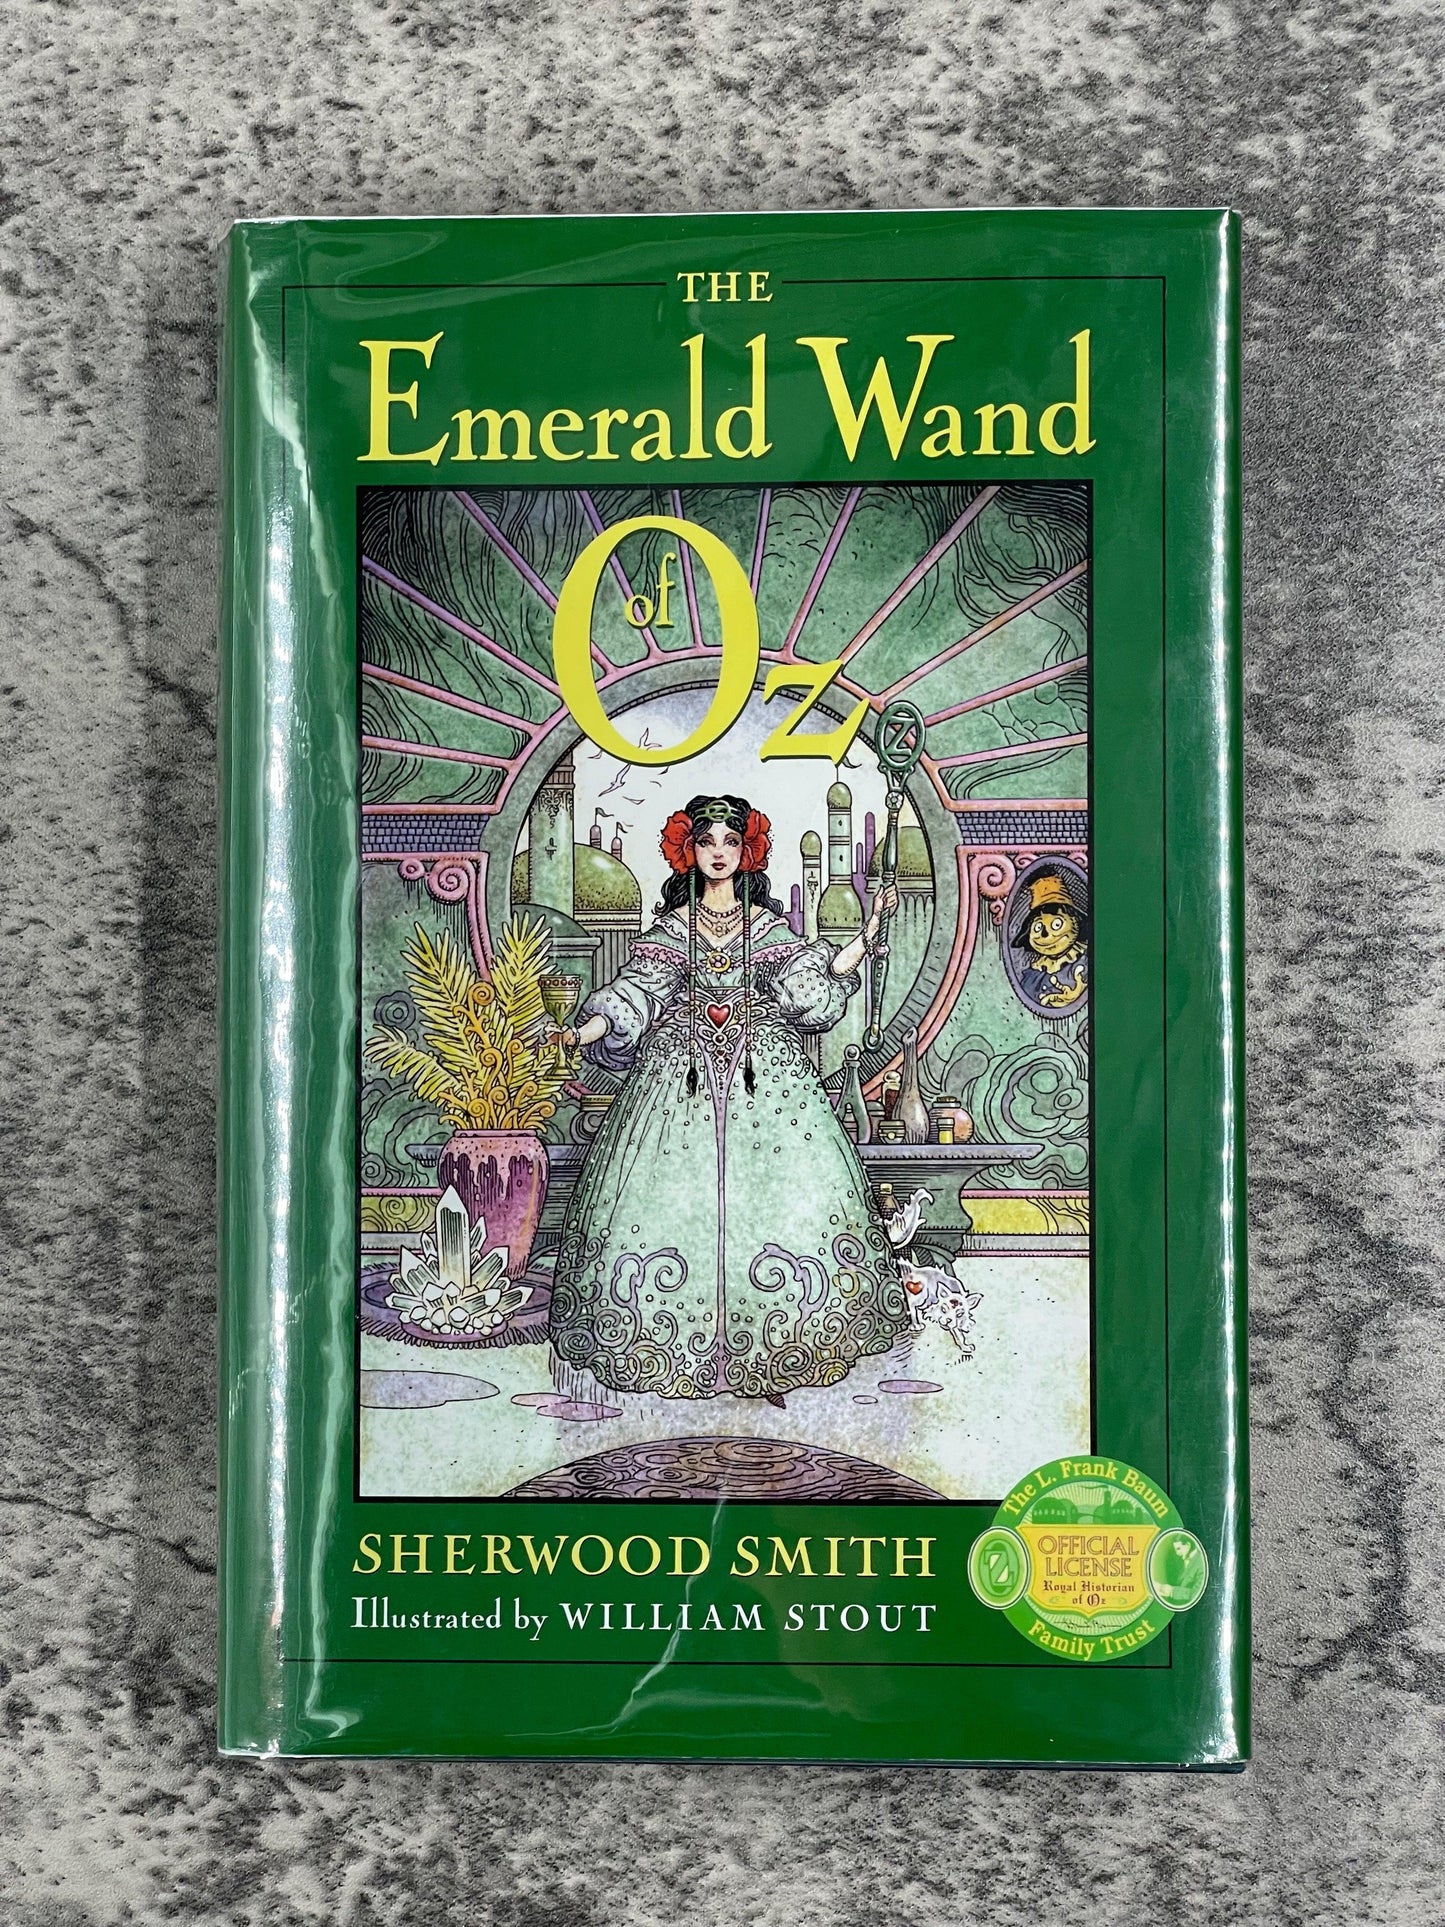 The Emerald Wand of Oz / Signed 1st Edition / 2005 - Precious Cache